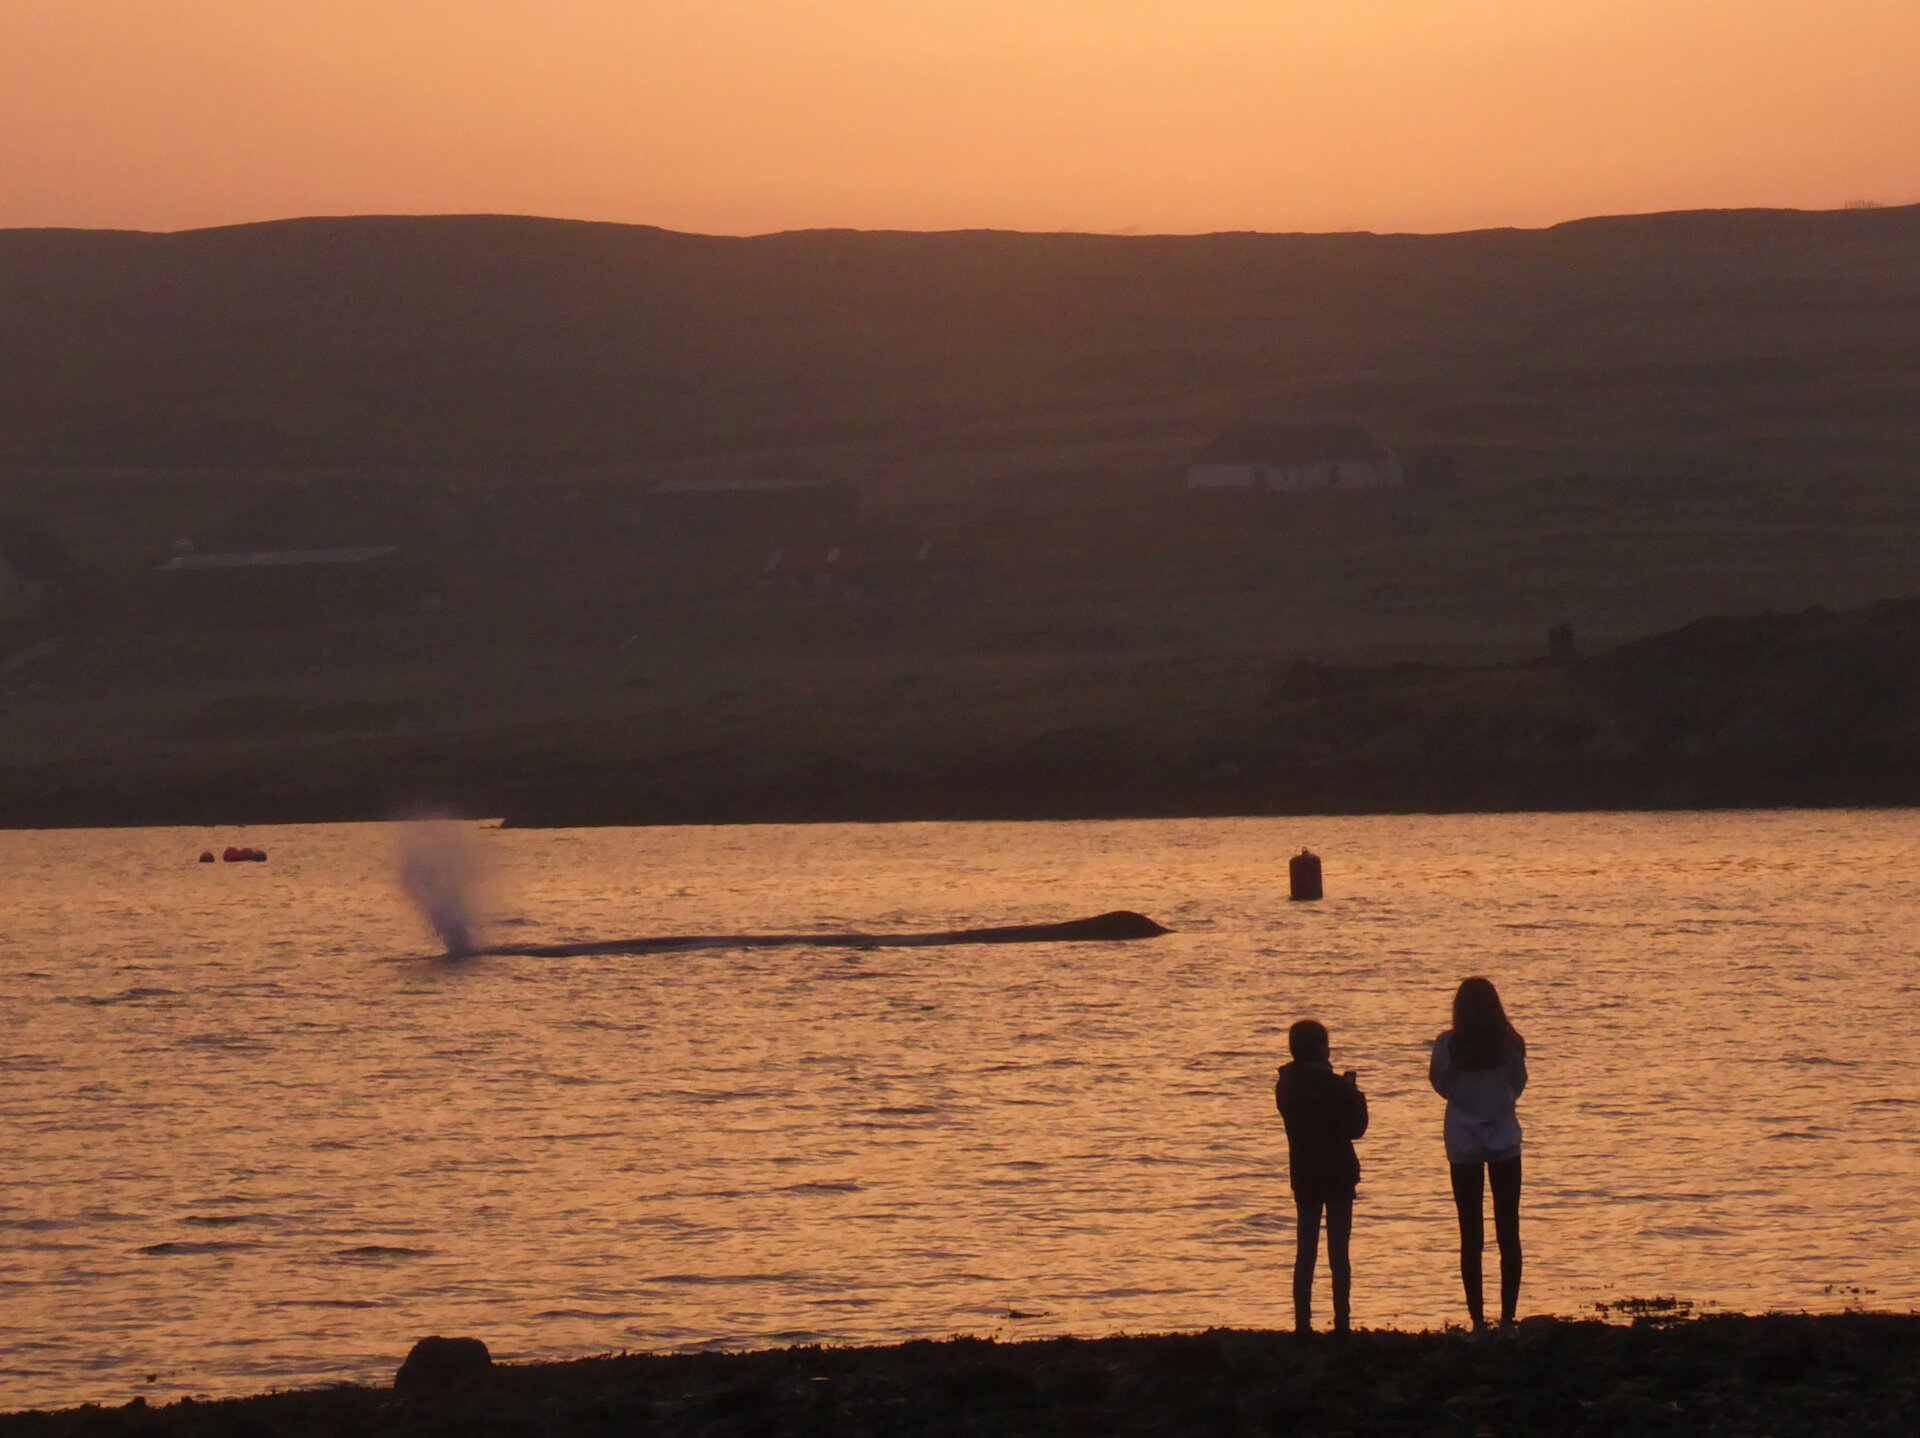 Shetland offers spectacular whale watching opportunities.